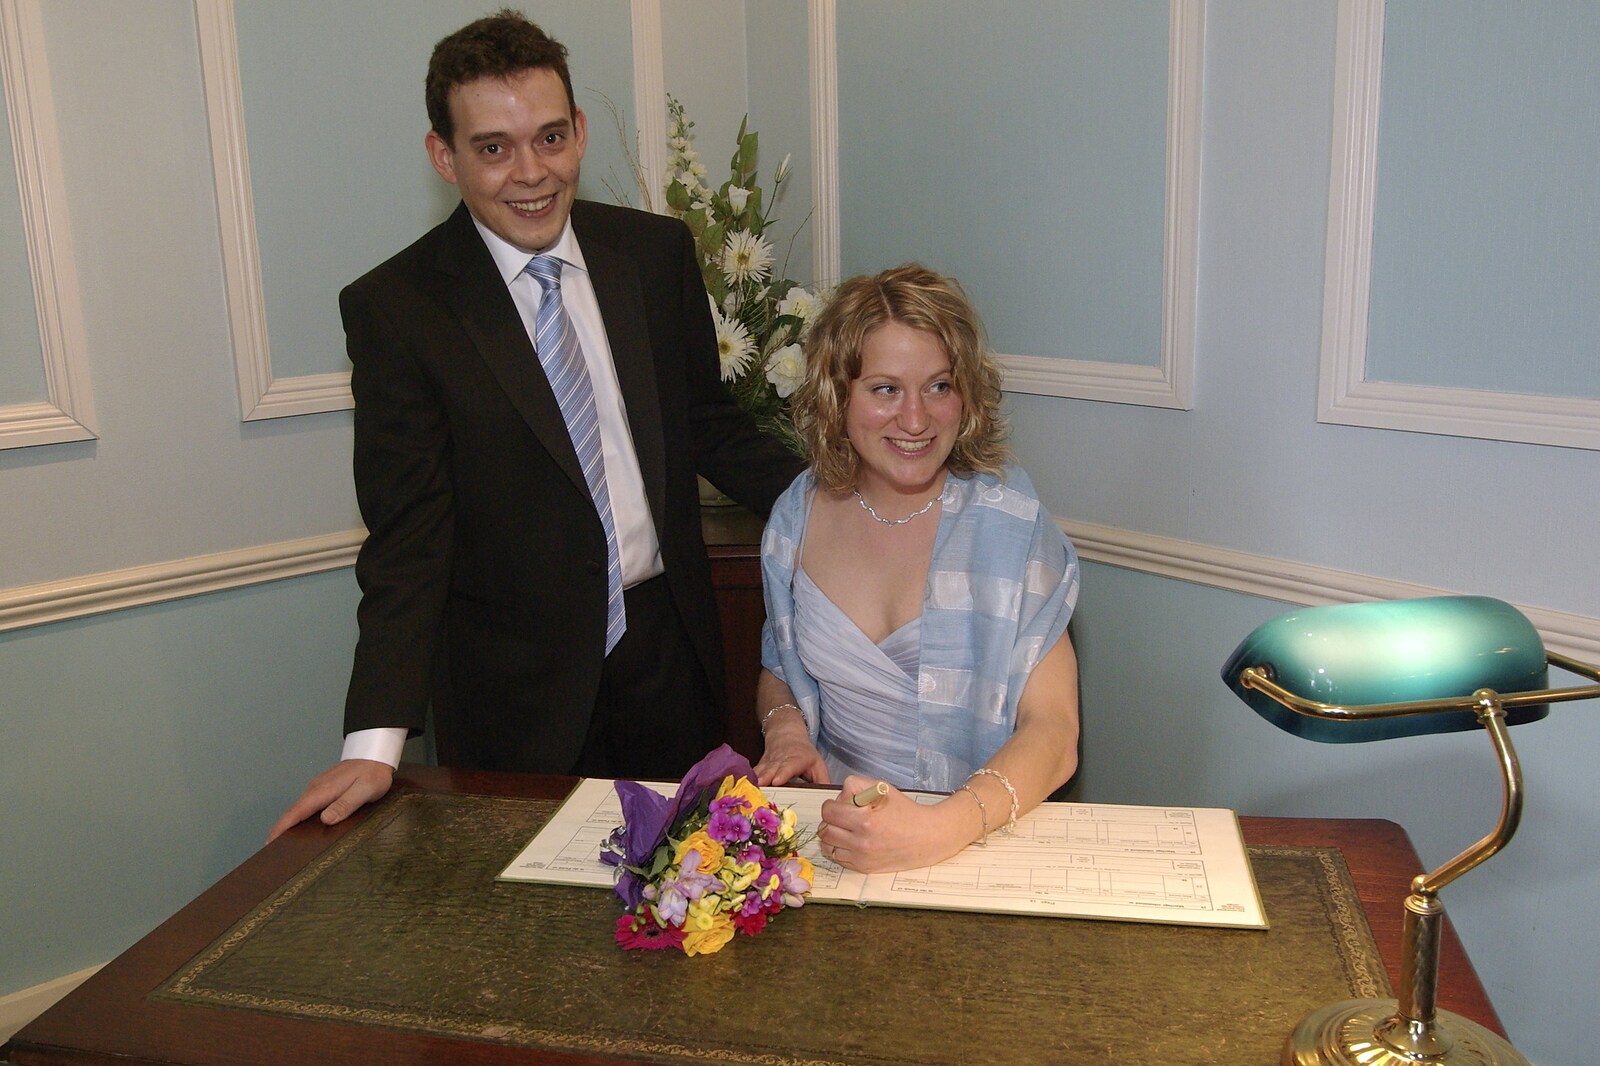 Hani and Anne's Wedding, County Hall, Cambridge - 2nd May 2008: Signing the register